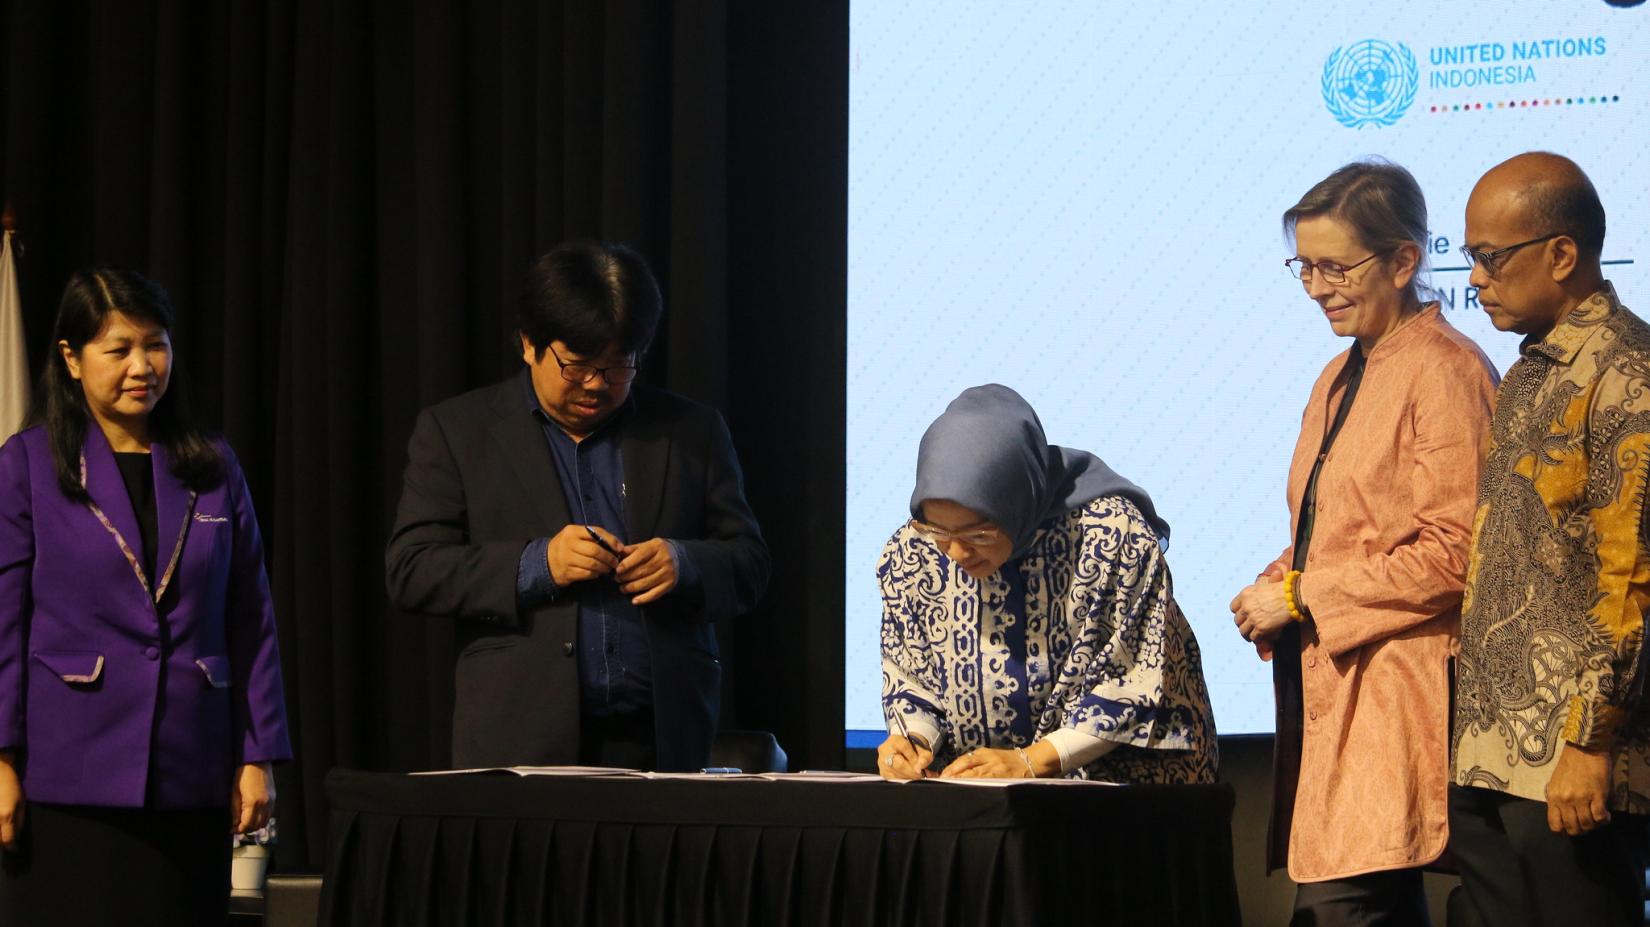 One person signs a paper on a table while four other people witnessing the signing ceremony